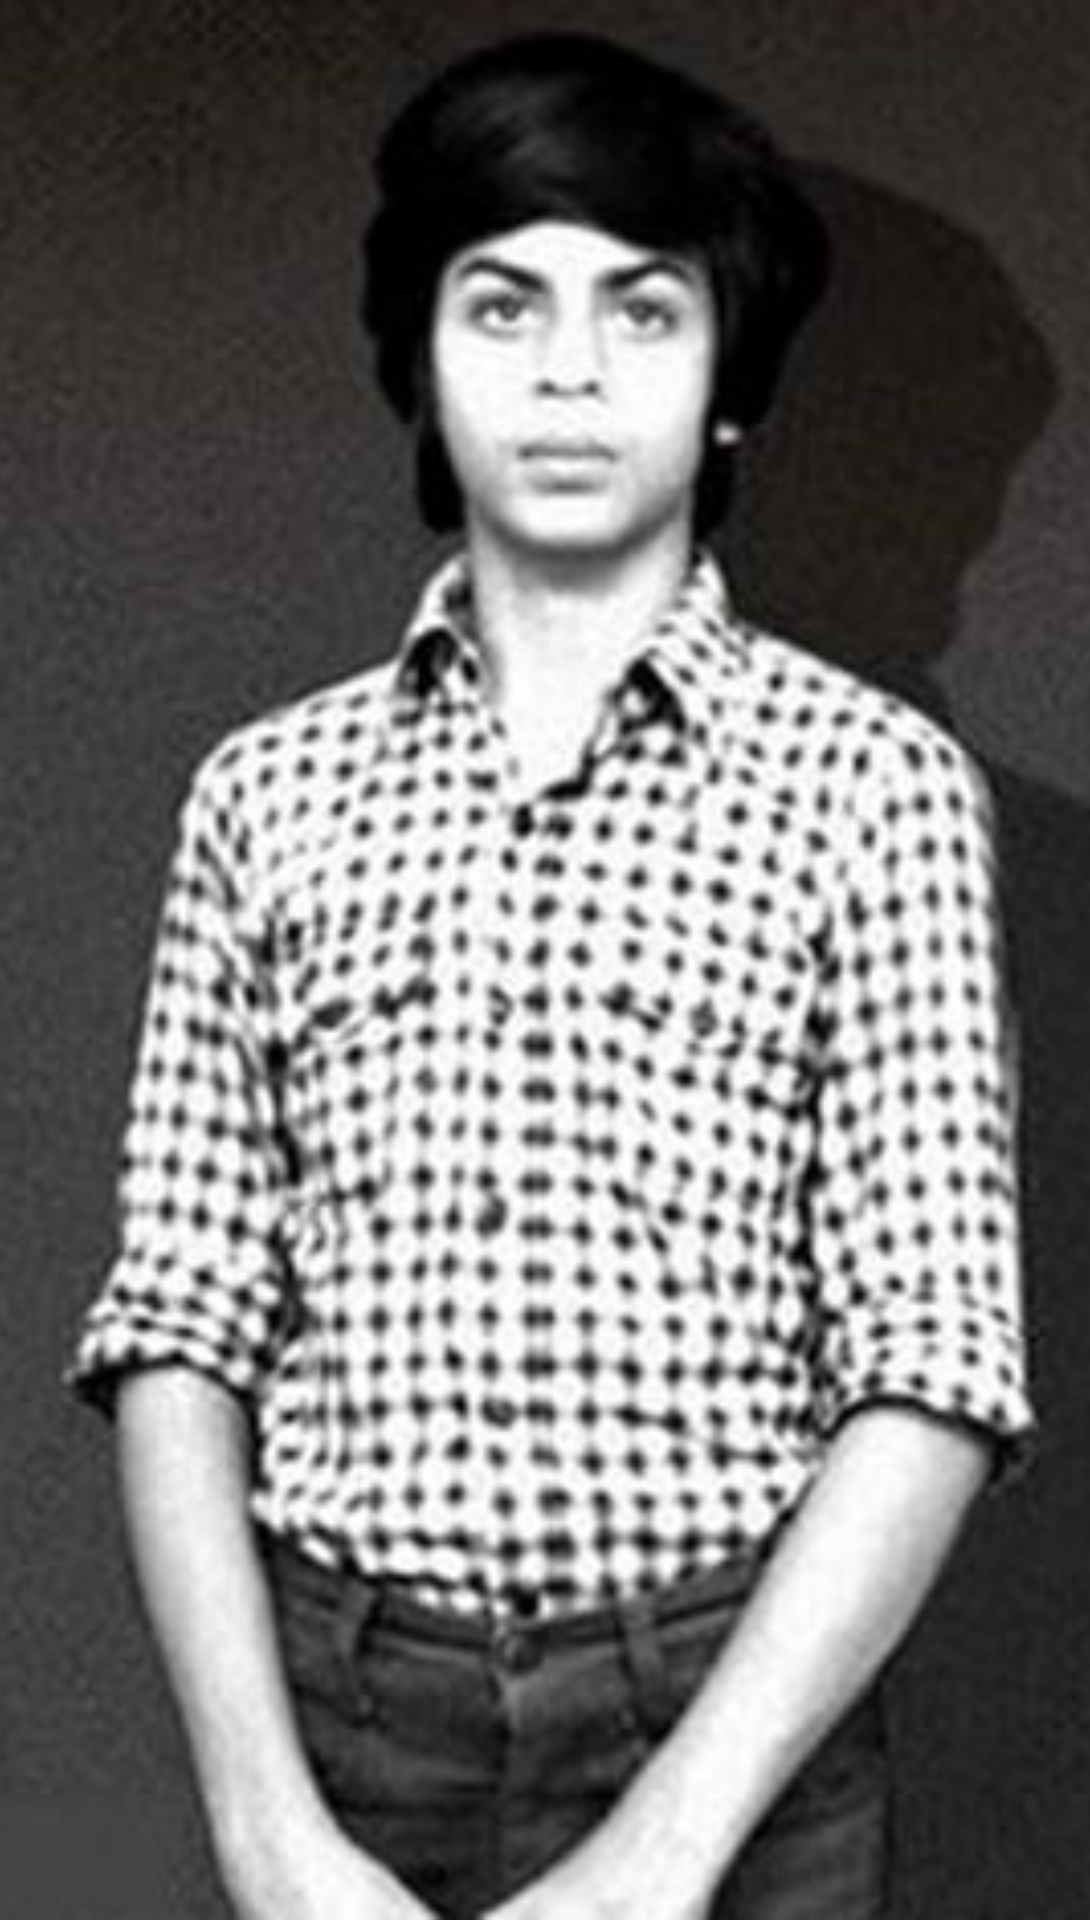 Shah Rukh Khan's rare photos from childhood & early Bollywood days